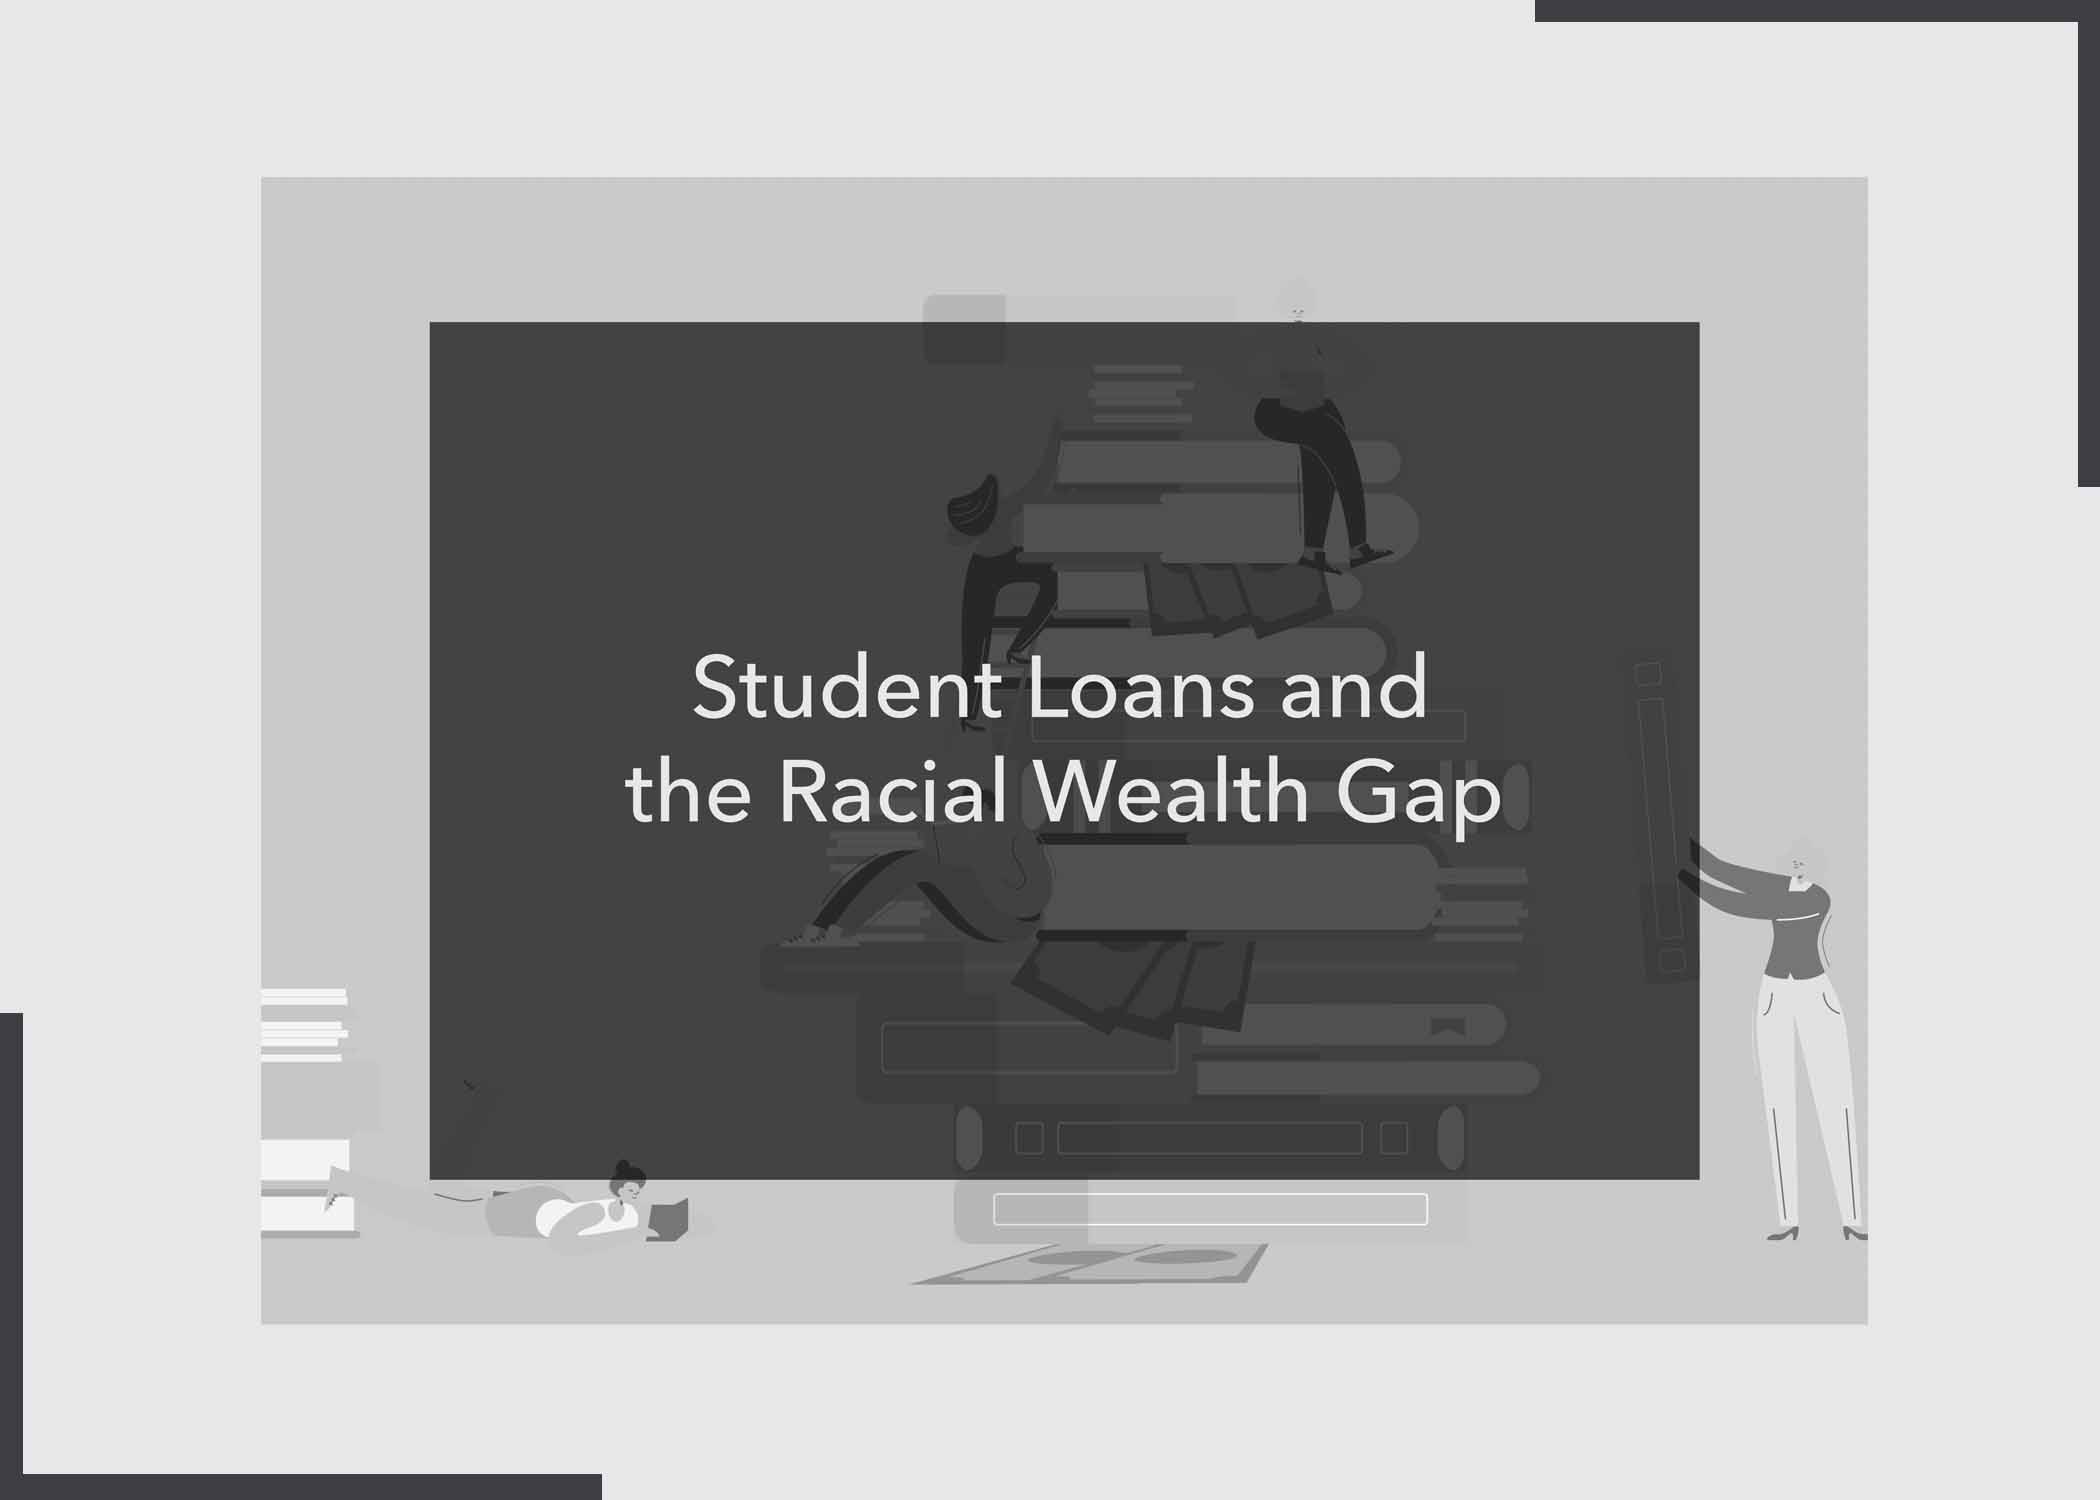 Student Loans and the Racial Wealth Gap